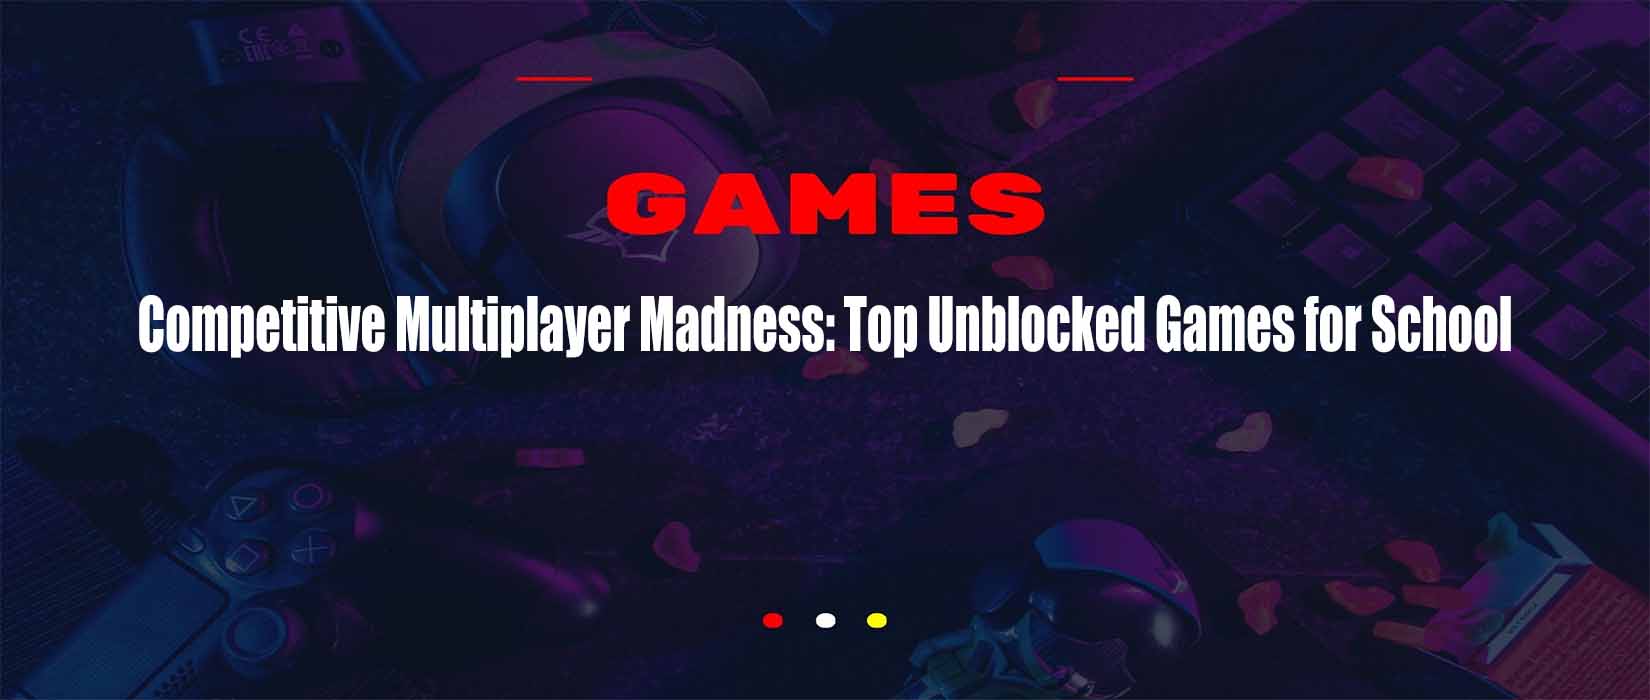 Competitive Multiplayer Madness: Top Unblocked Games for School